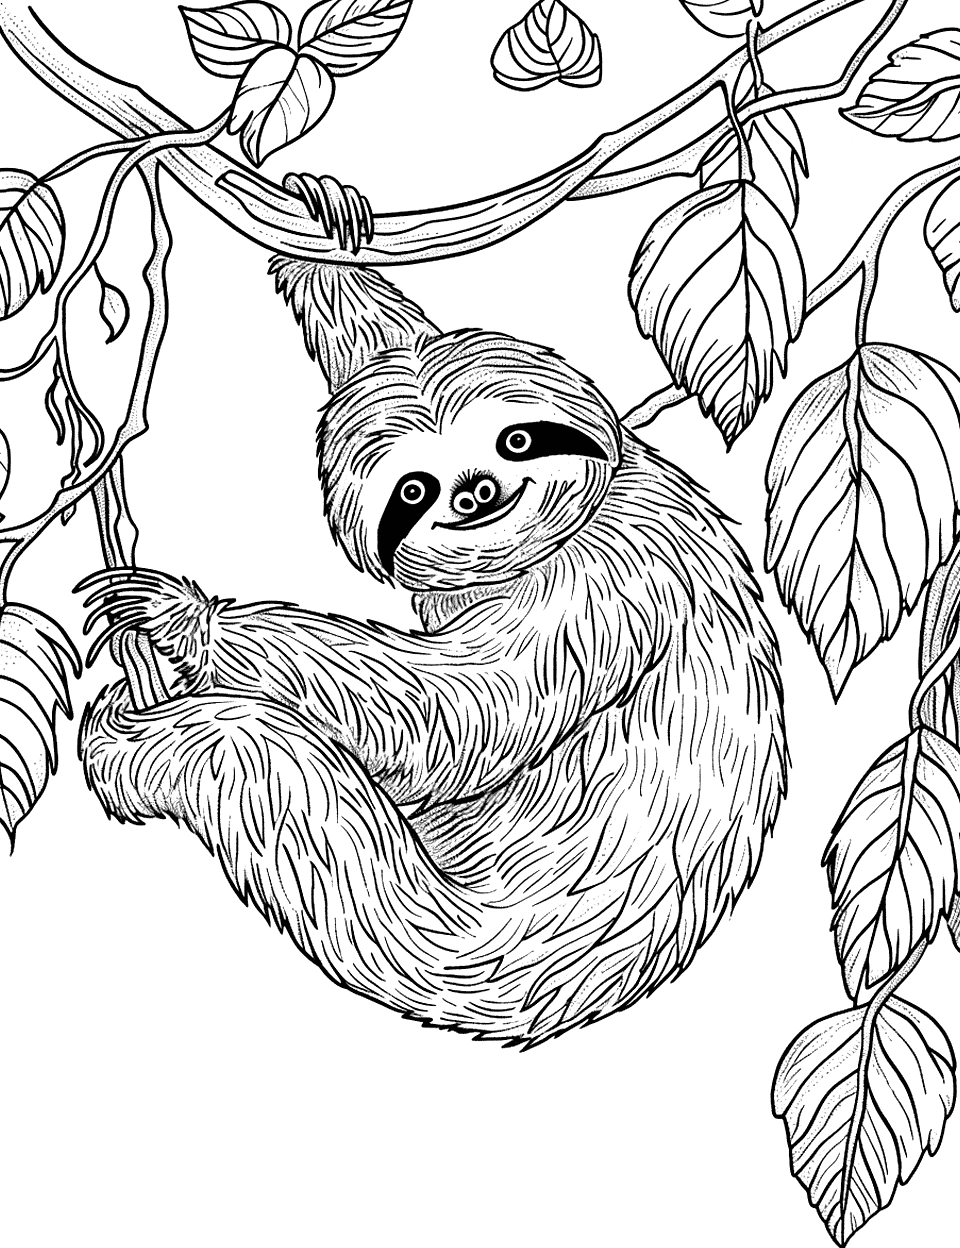 Realistic Sloth on a Vine Coloring Page - A detailed, lifelike sloth with textured fur hangs lazily from a vine.